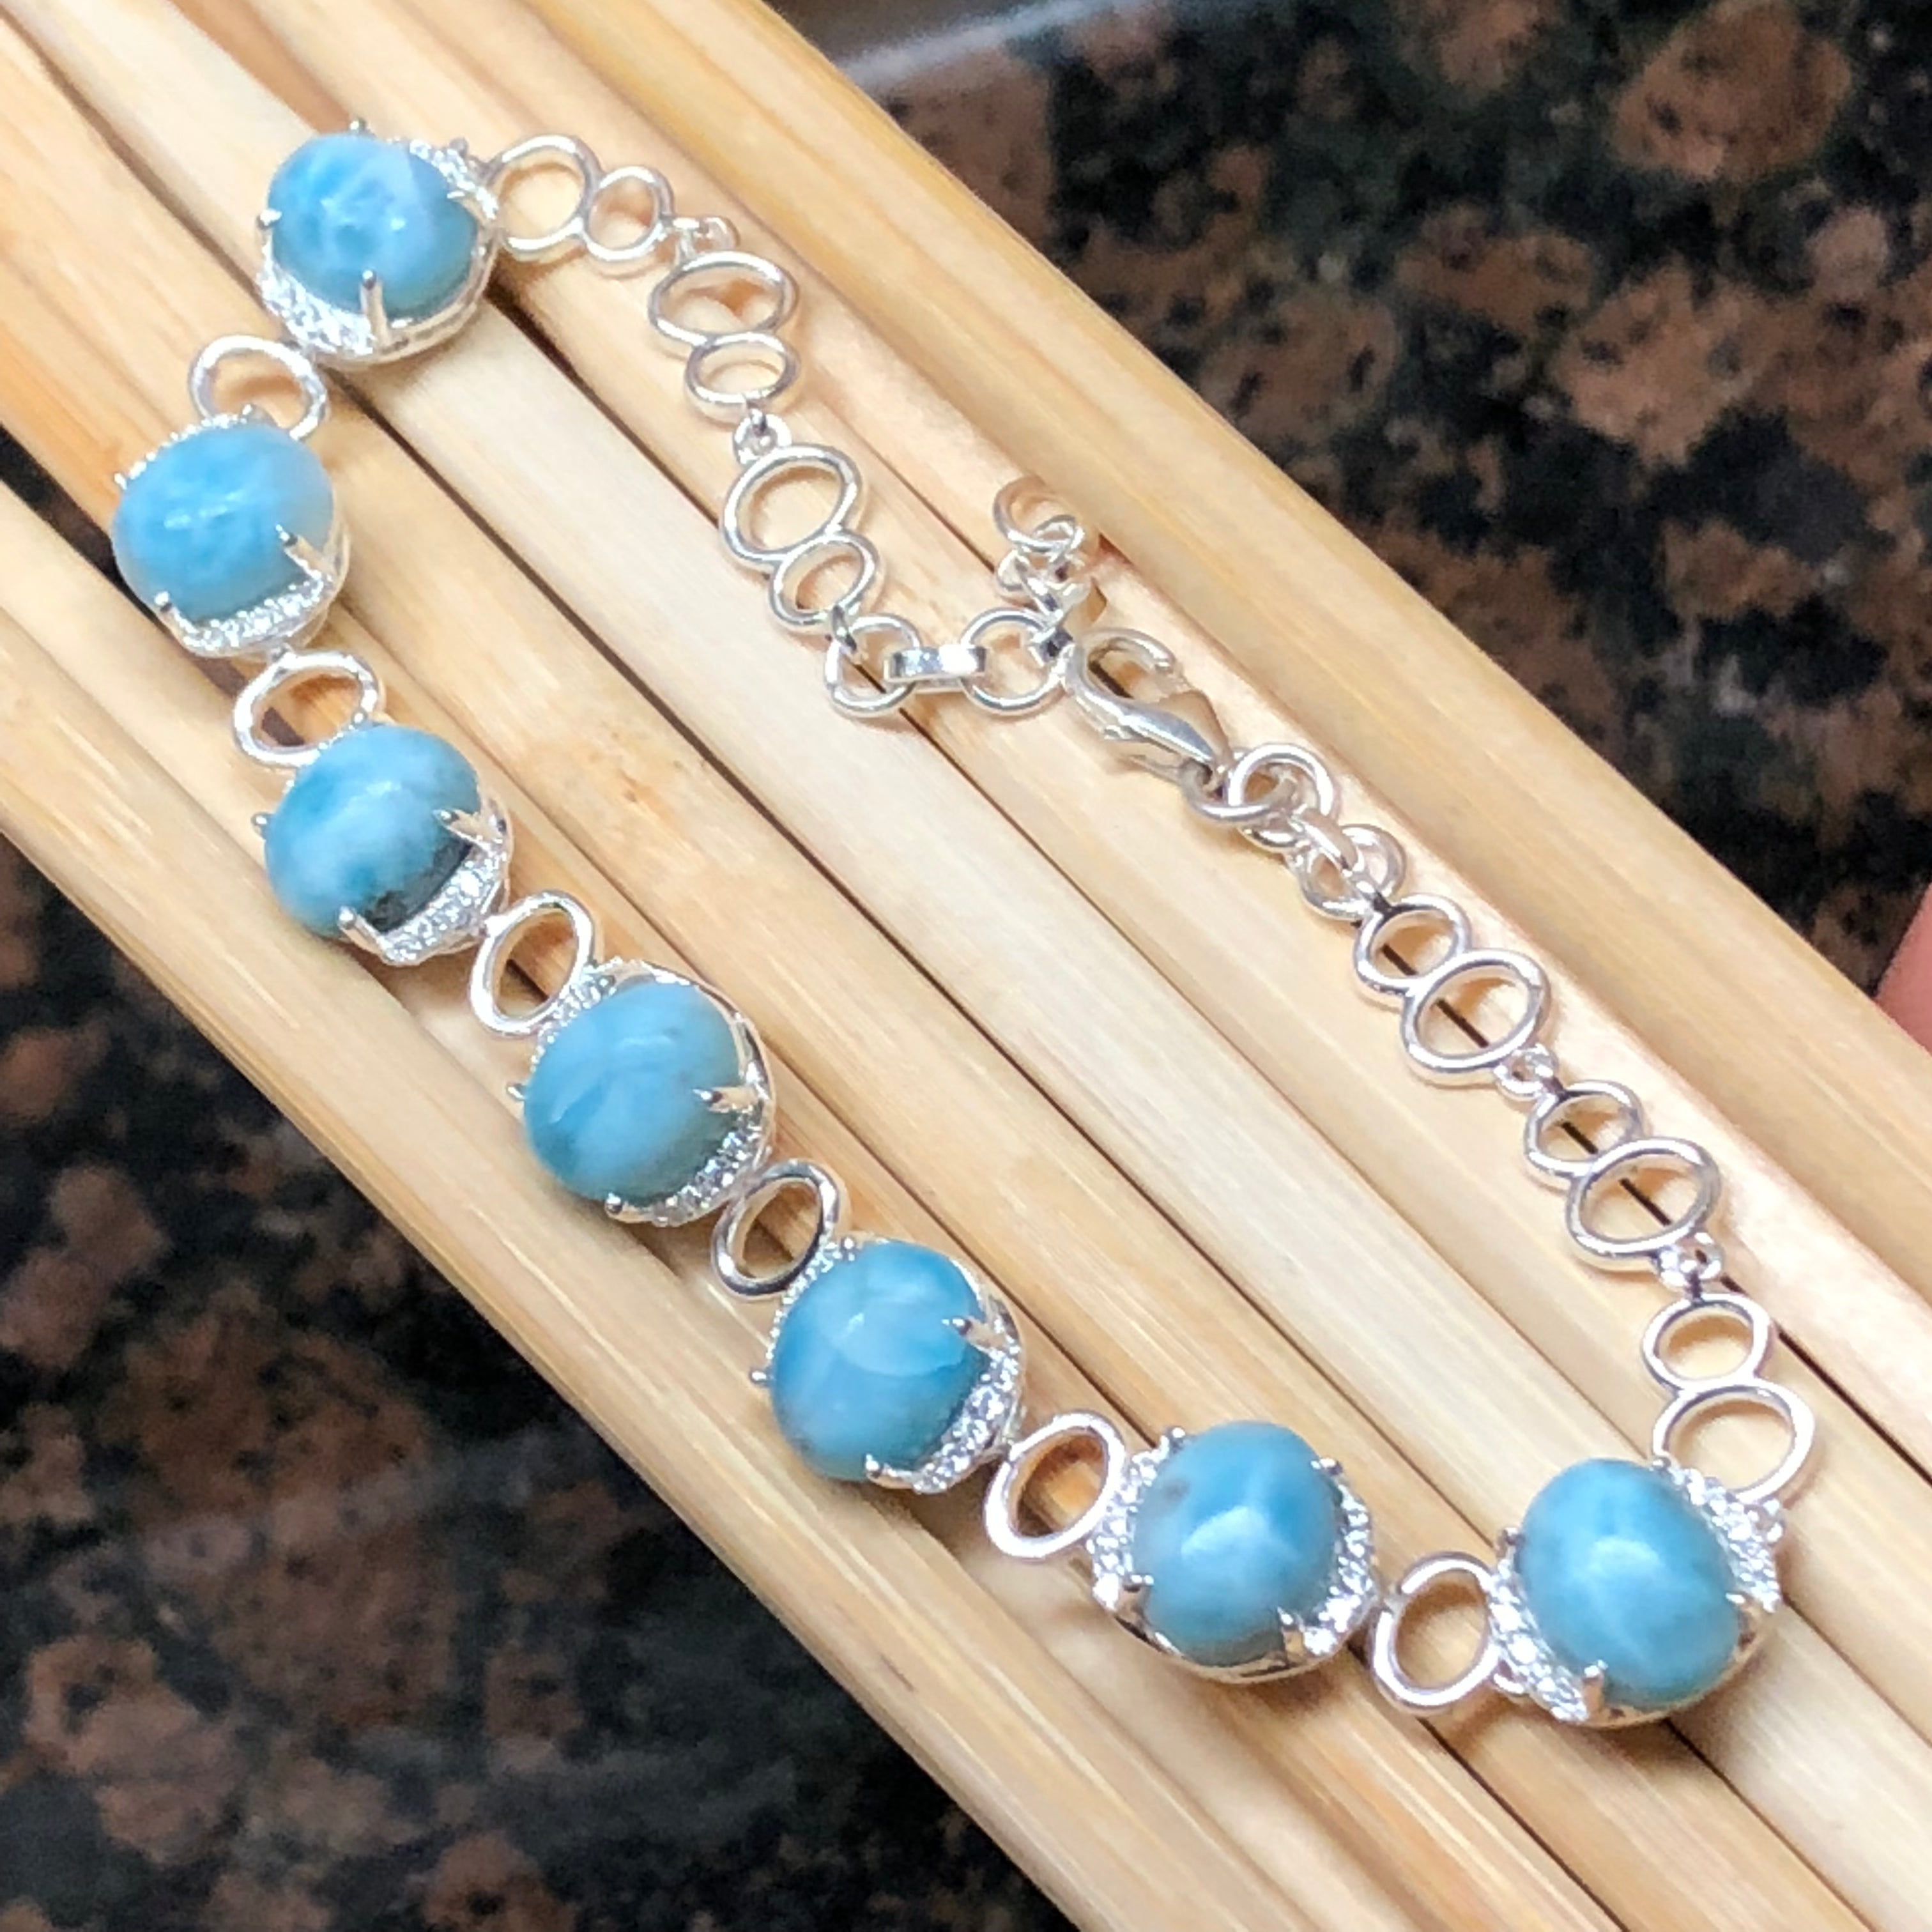 Natural Dominican Larimar, White Sapphire 925 Solid Sterling Silver Bracelets 7 1/2 inches - Natural Rocks by Kala